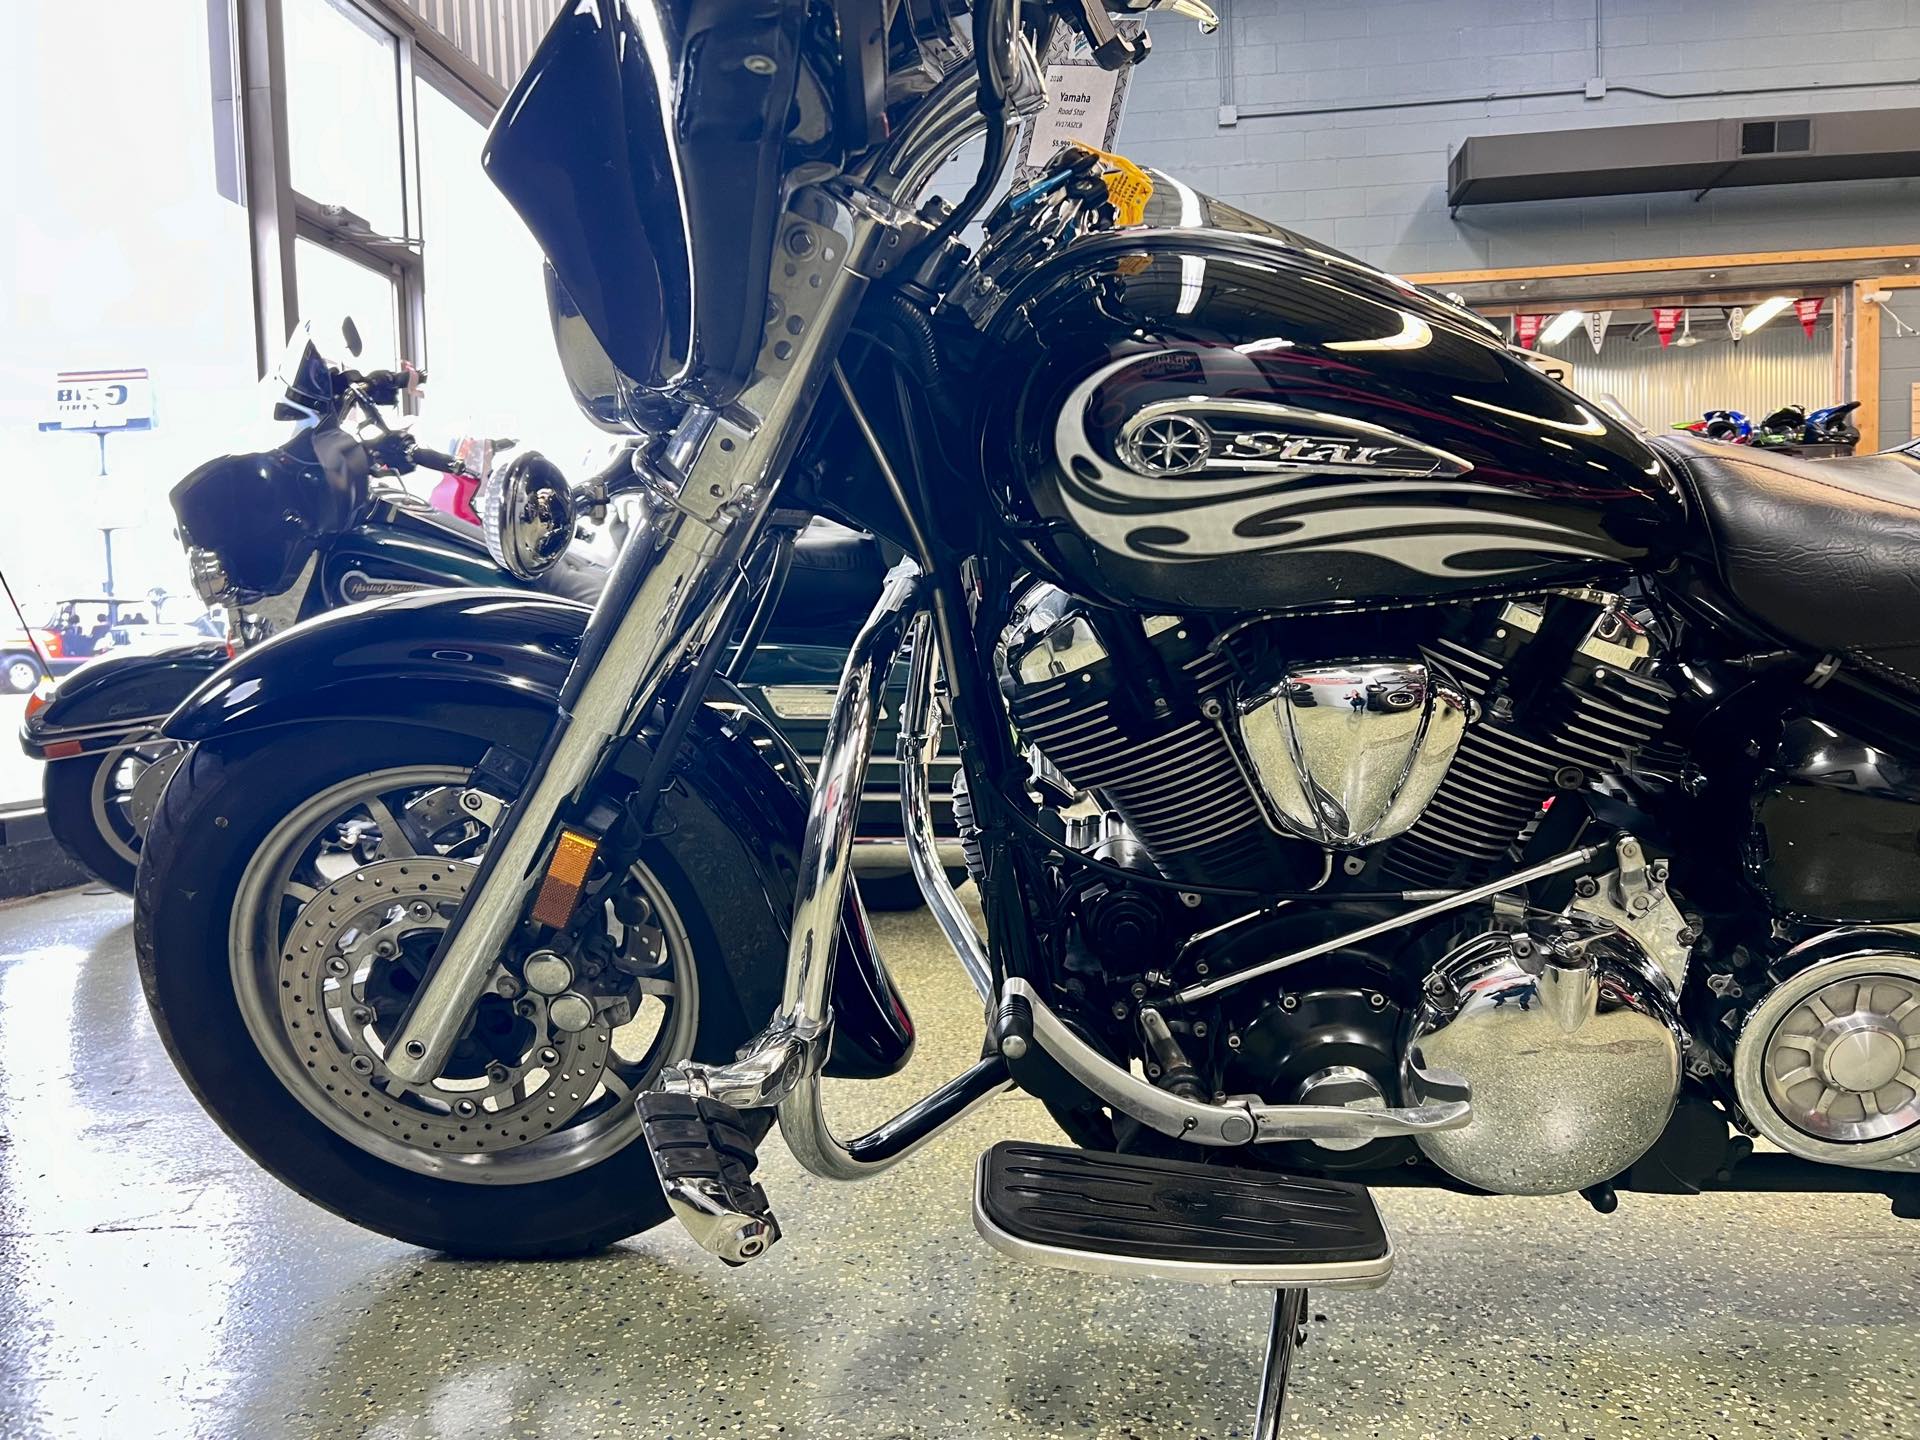 2010 Yamaha Road Star at Thornton's Motorcycle Sales, Madison, IN